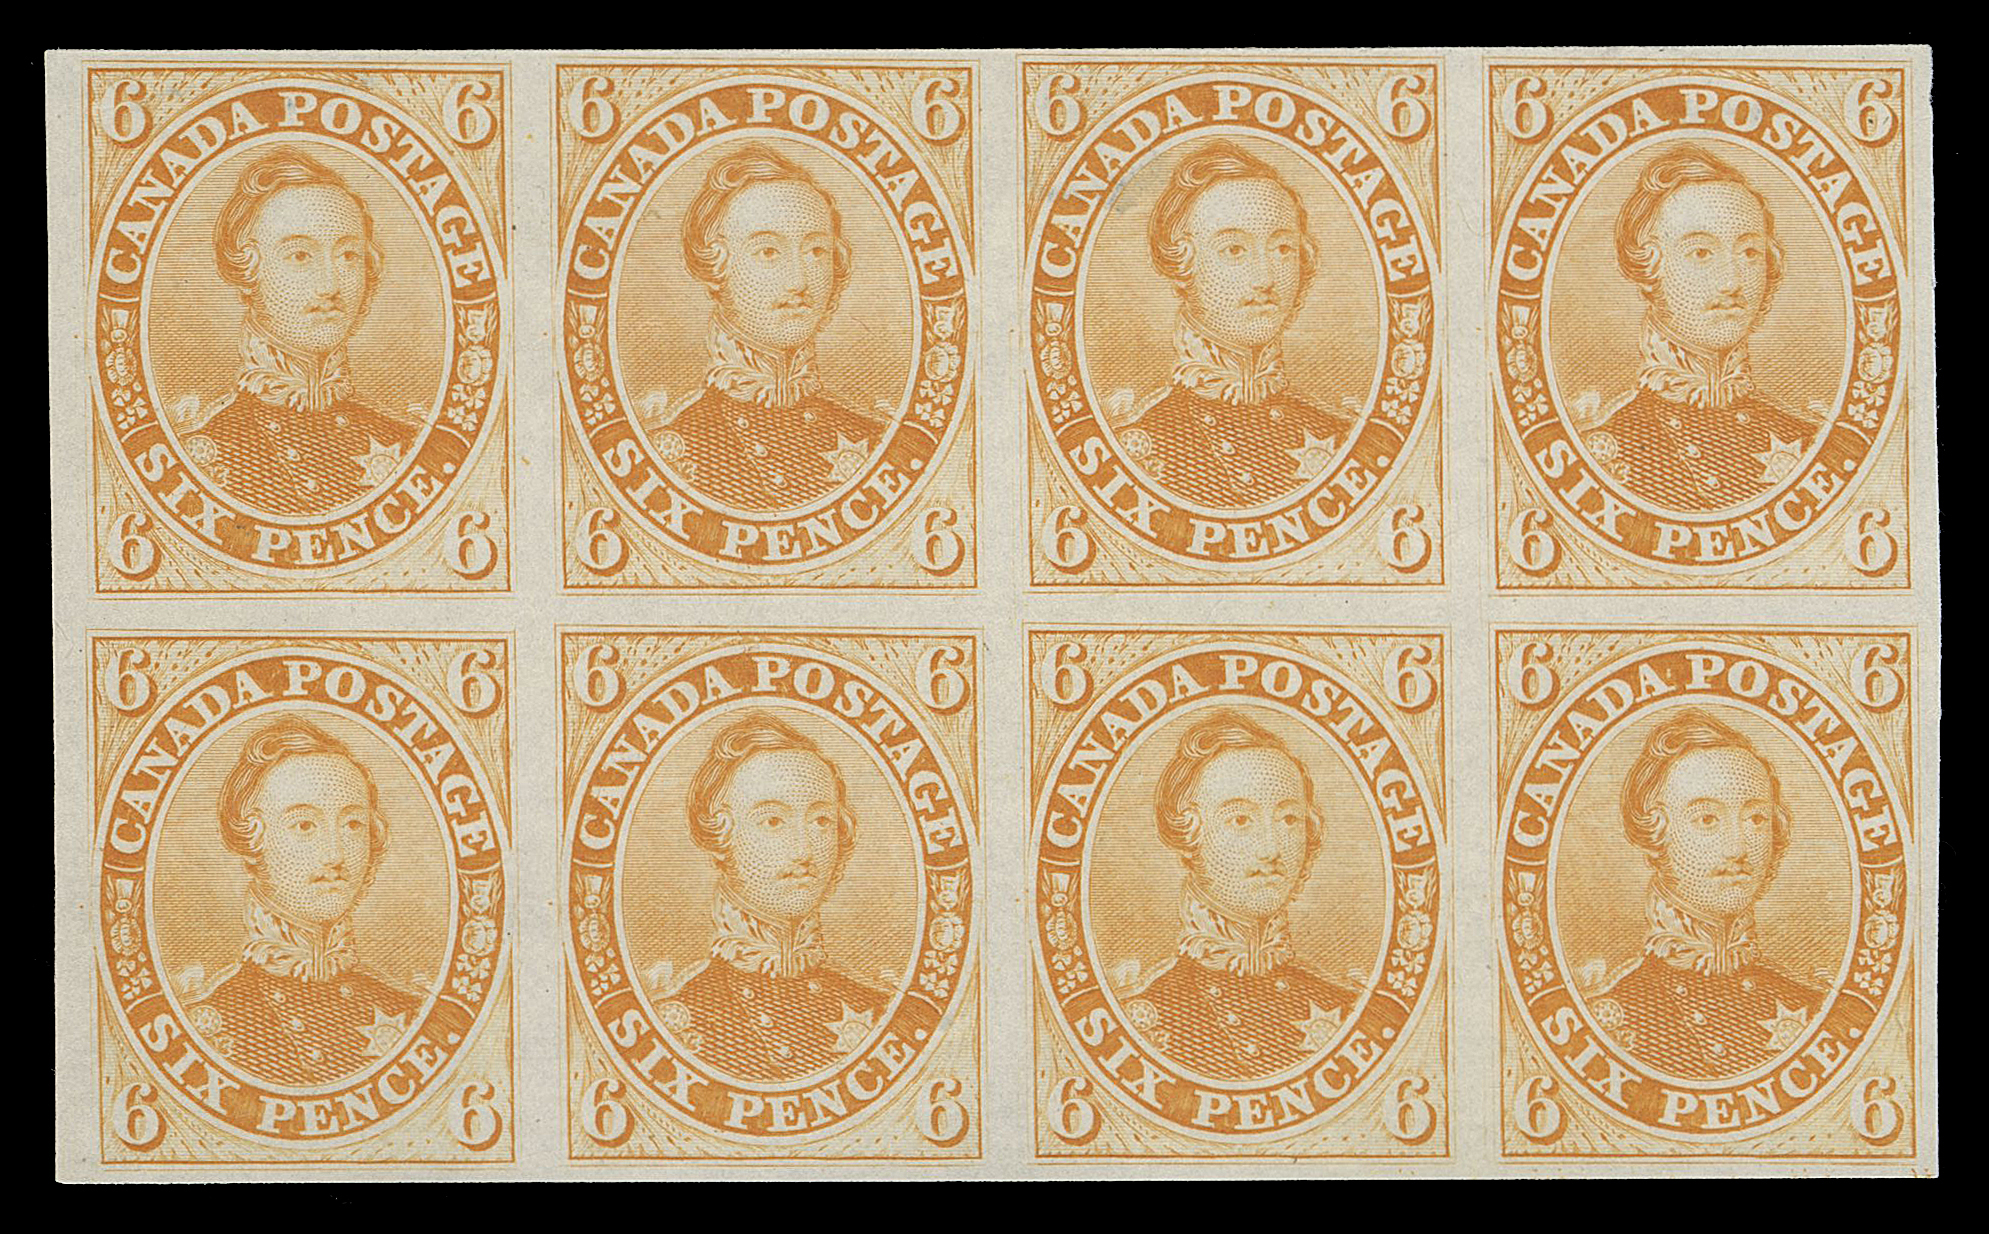 SIX PENCE AND TEN CENTS  2TCii,A beautiful trial colour plate proof block of eight printed in orange yellow on india paper; rarely seen coloured in such a large multiple, VF